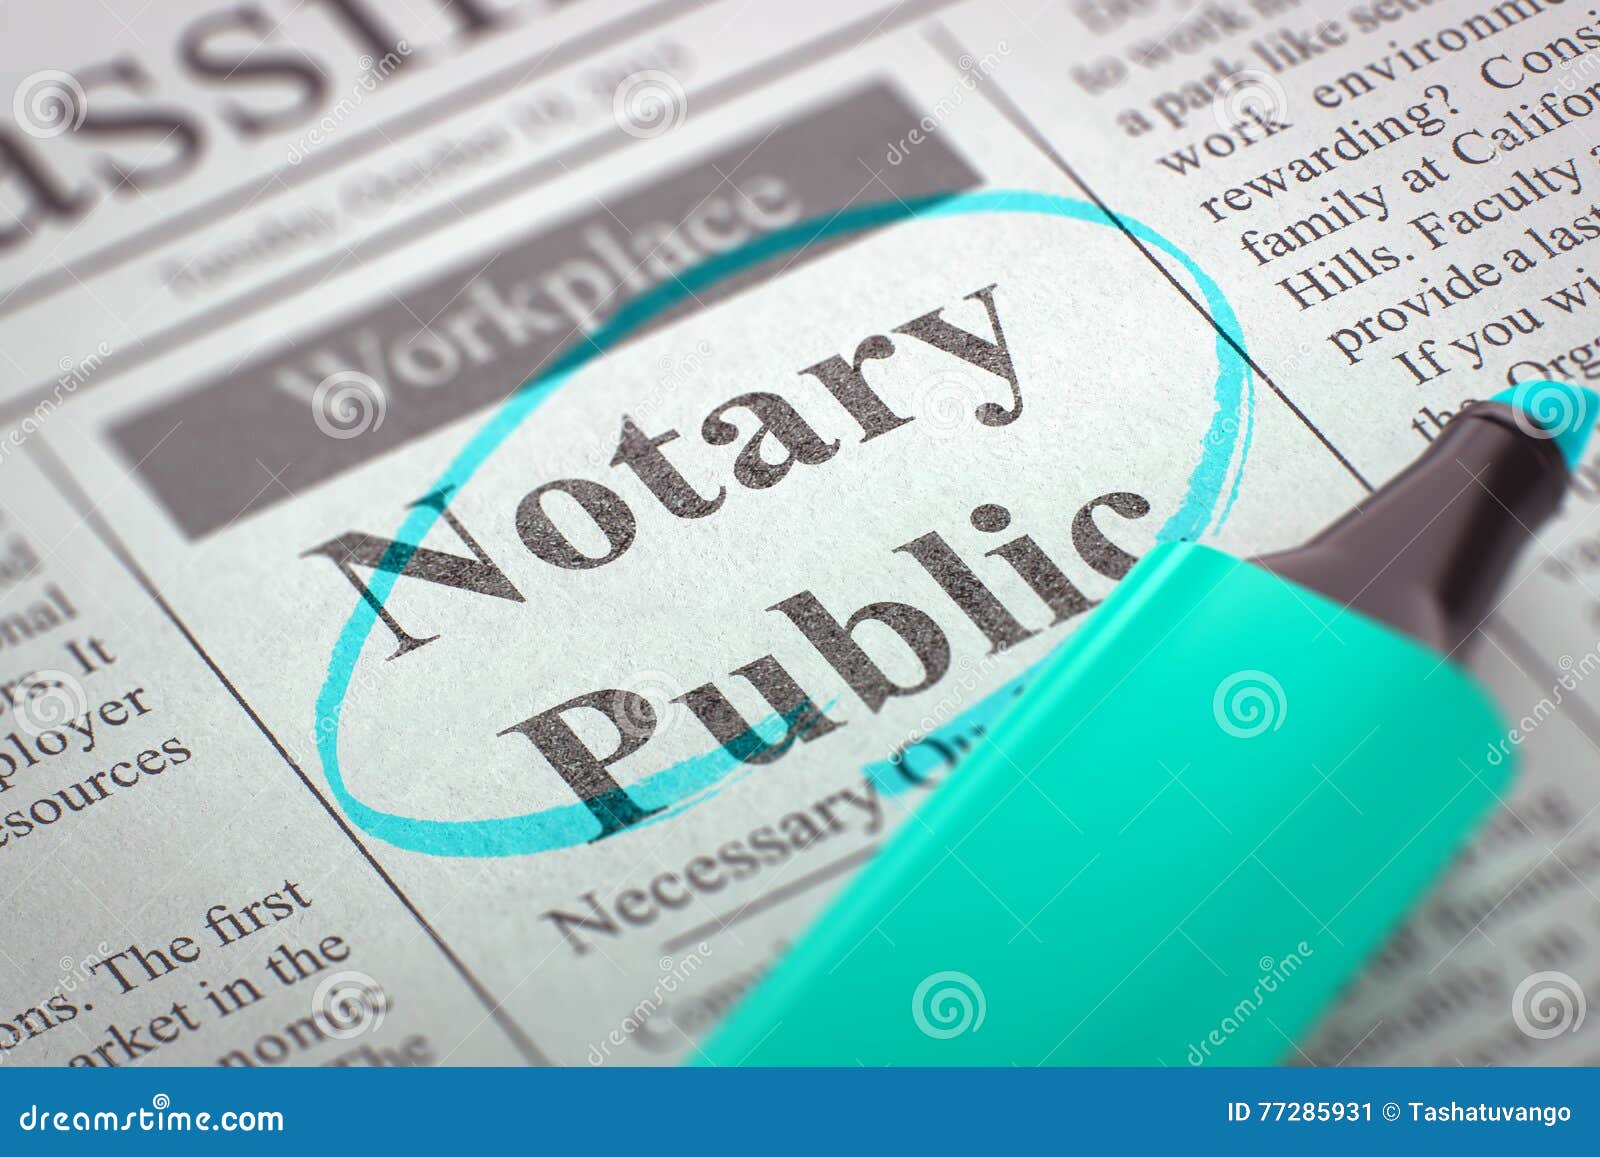 notary public wanted. 3d render.